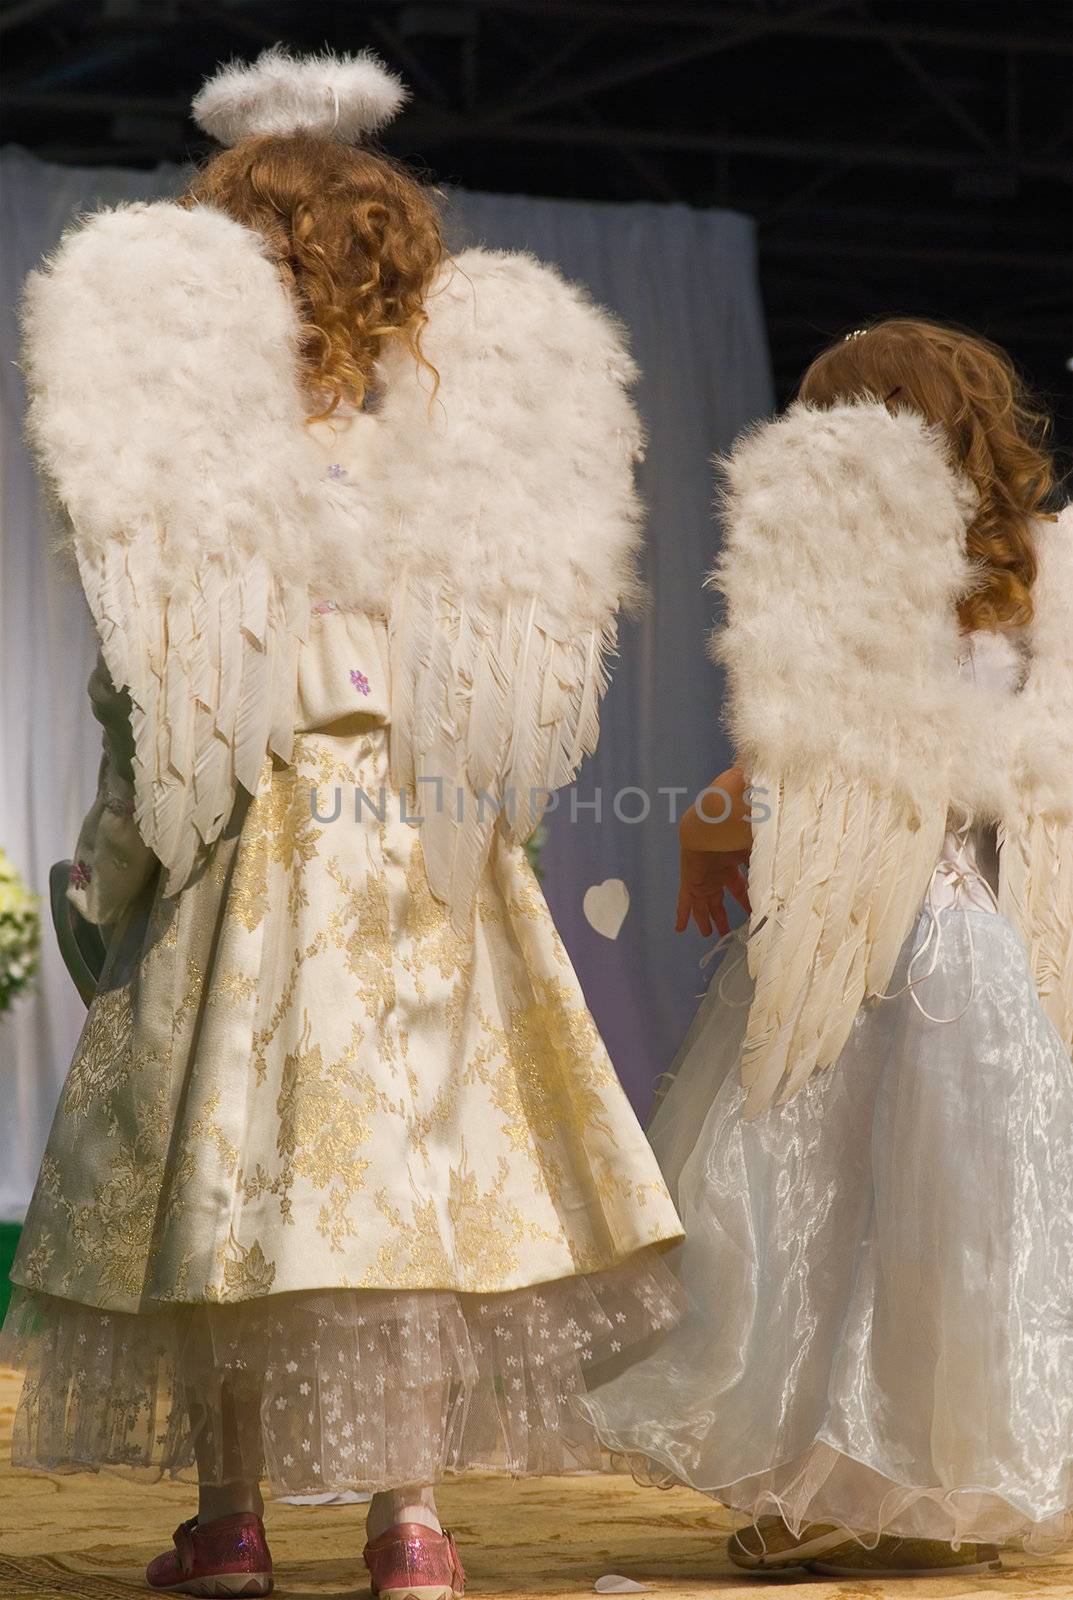 little girls in white dress and angel wings